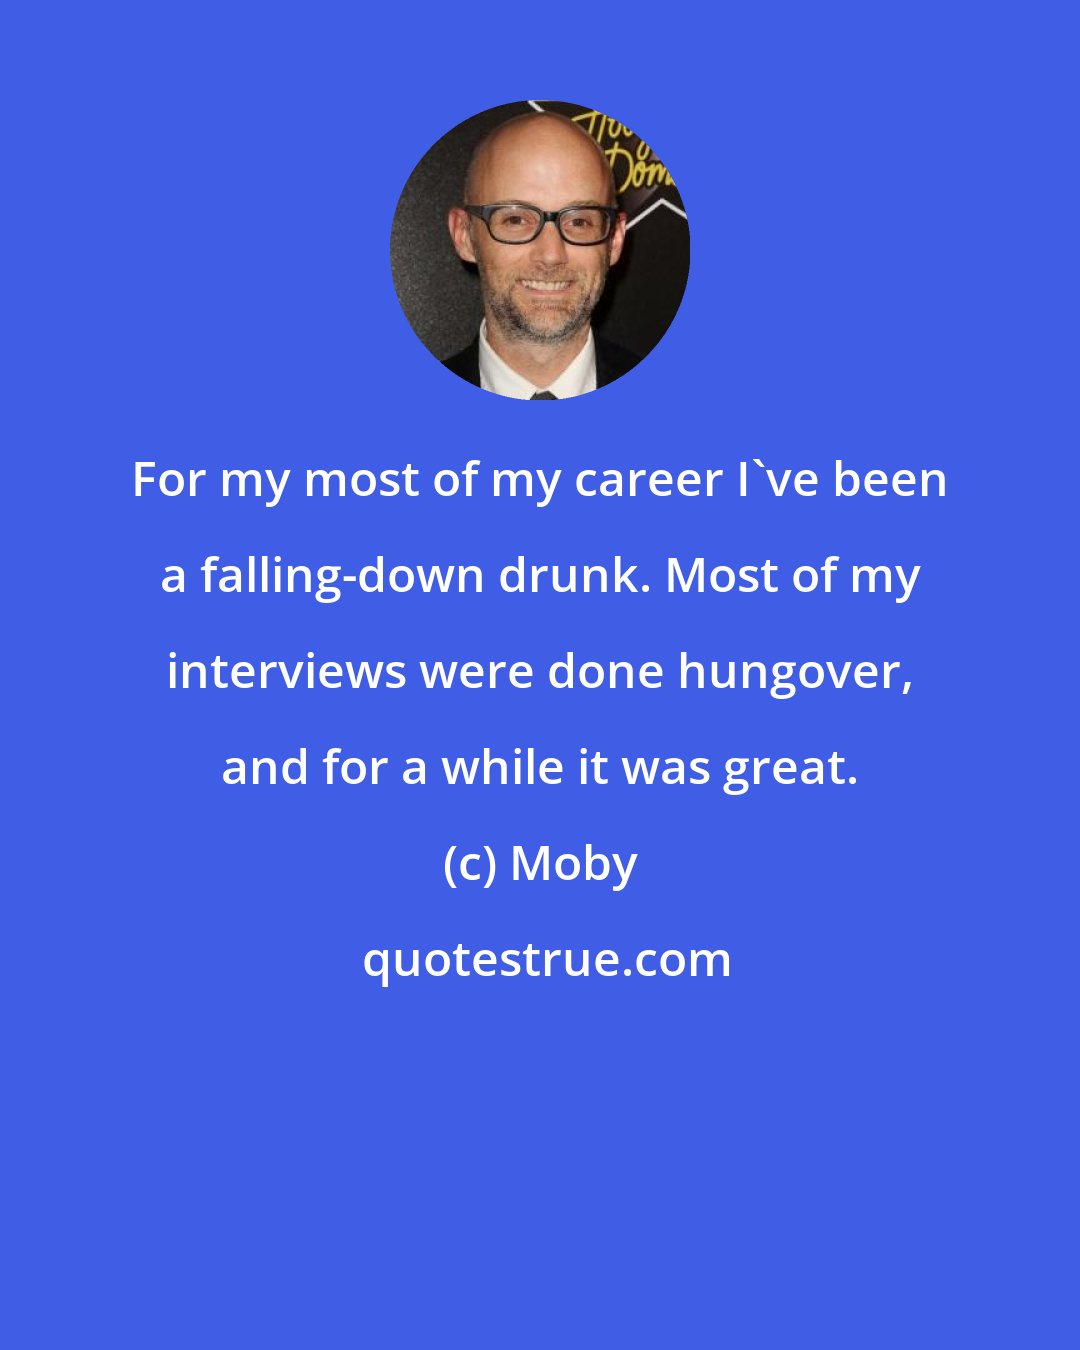 Moby: For my most of my career I've been a falling-down drunk. Most of my interviews were done hungover, and for a while it was great.